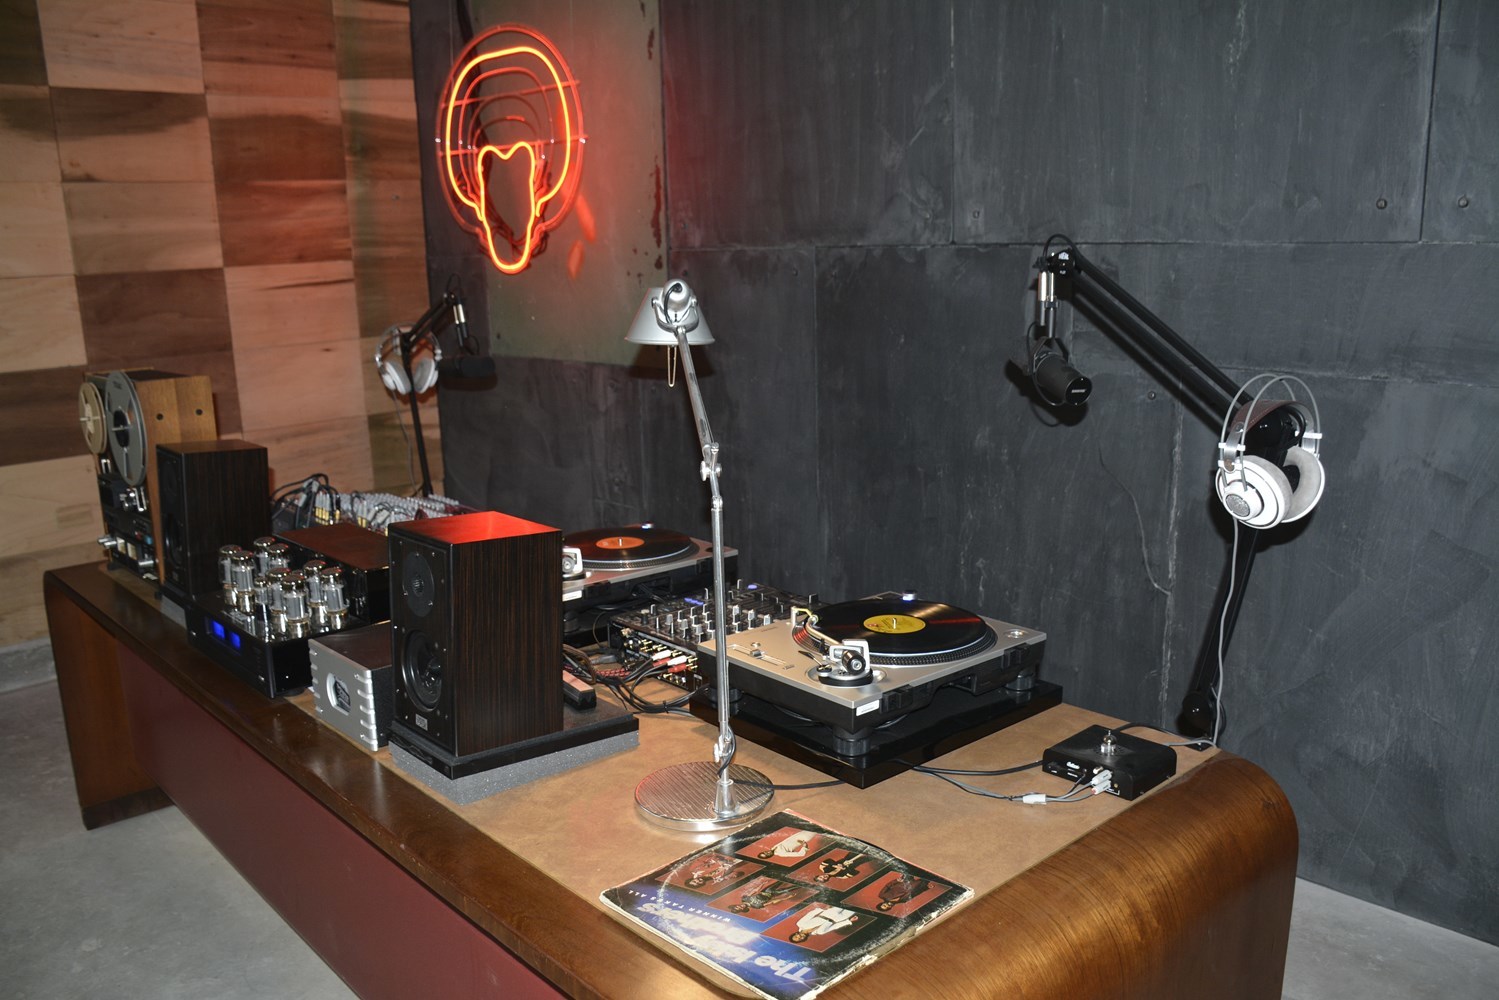 AESOP is the first of its kind in the nation active radio/DJ booth in a rapid transit station